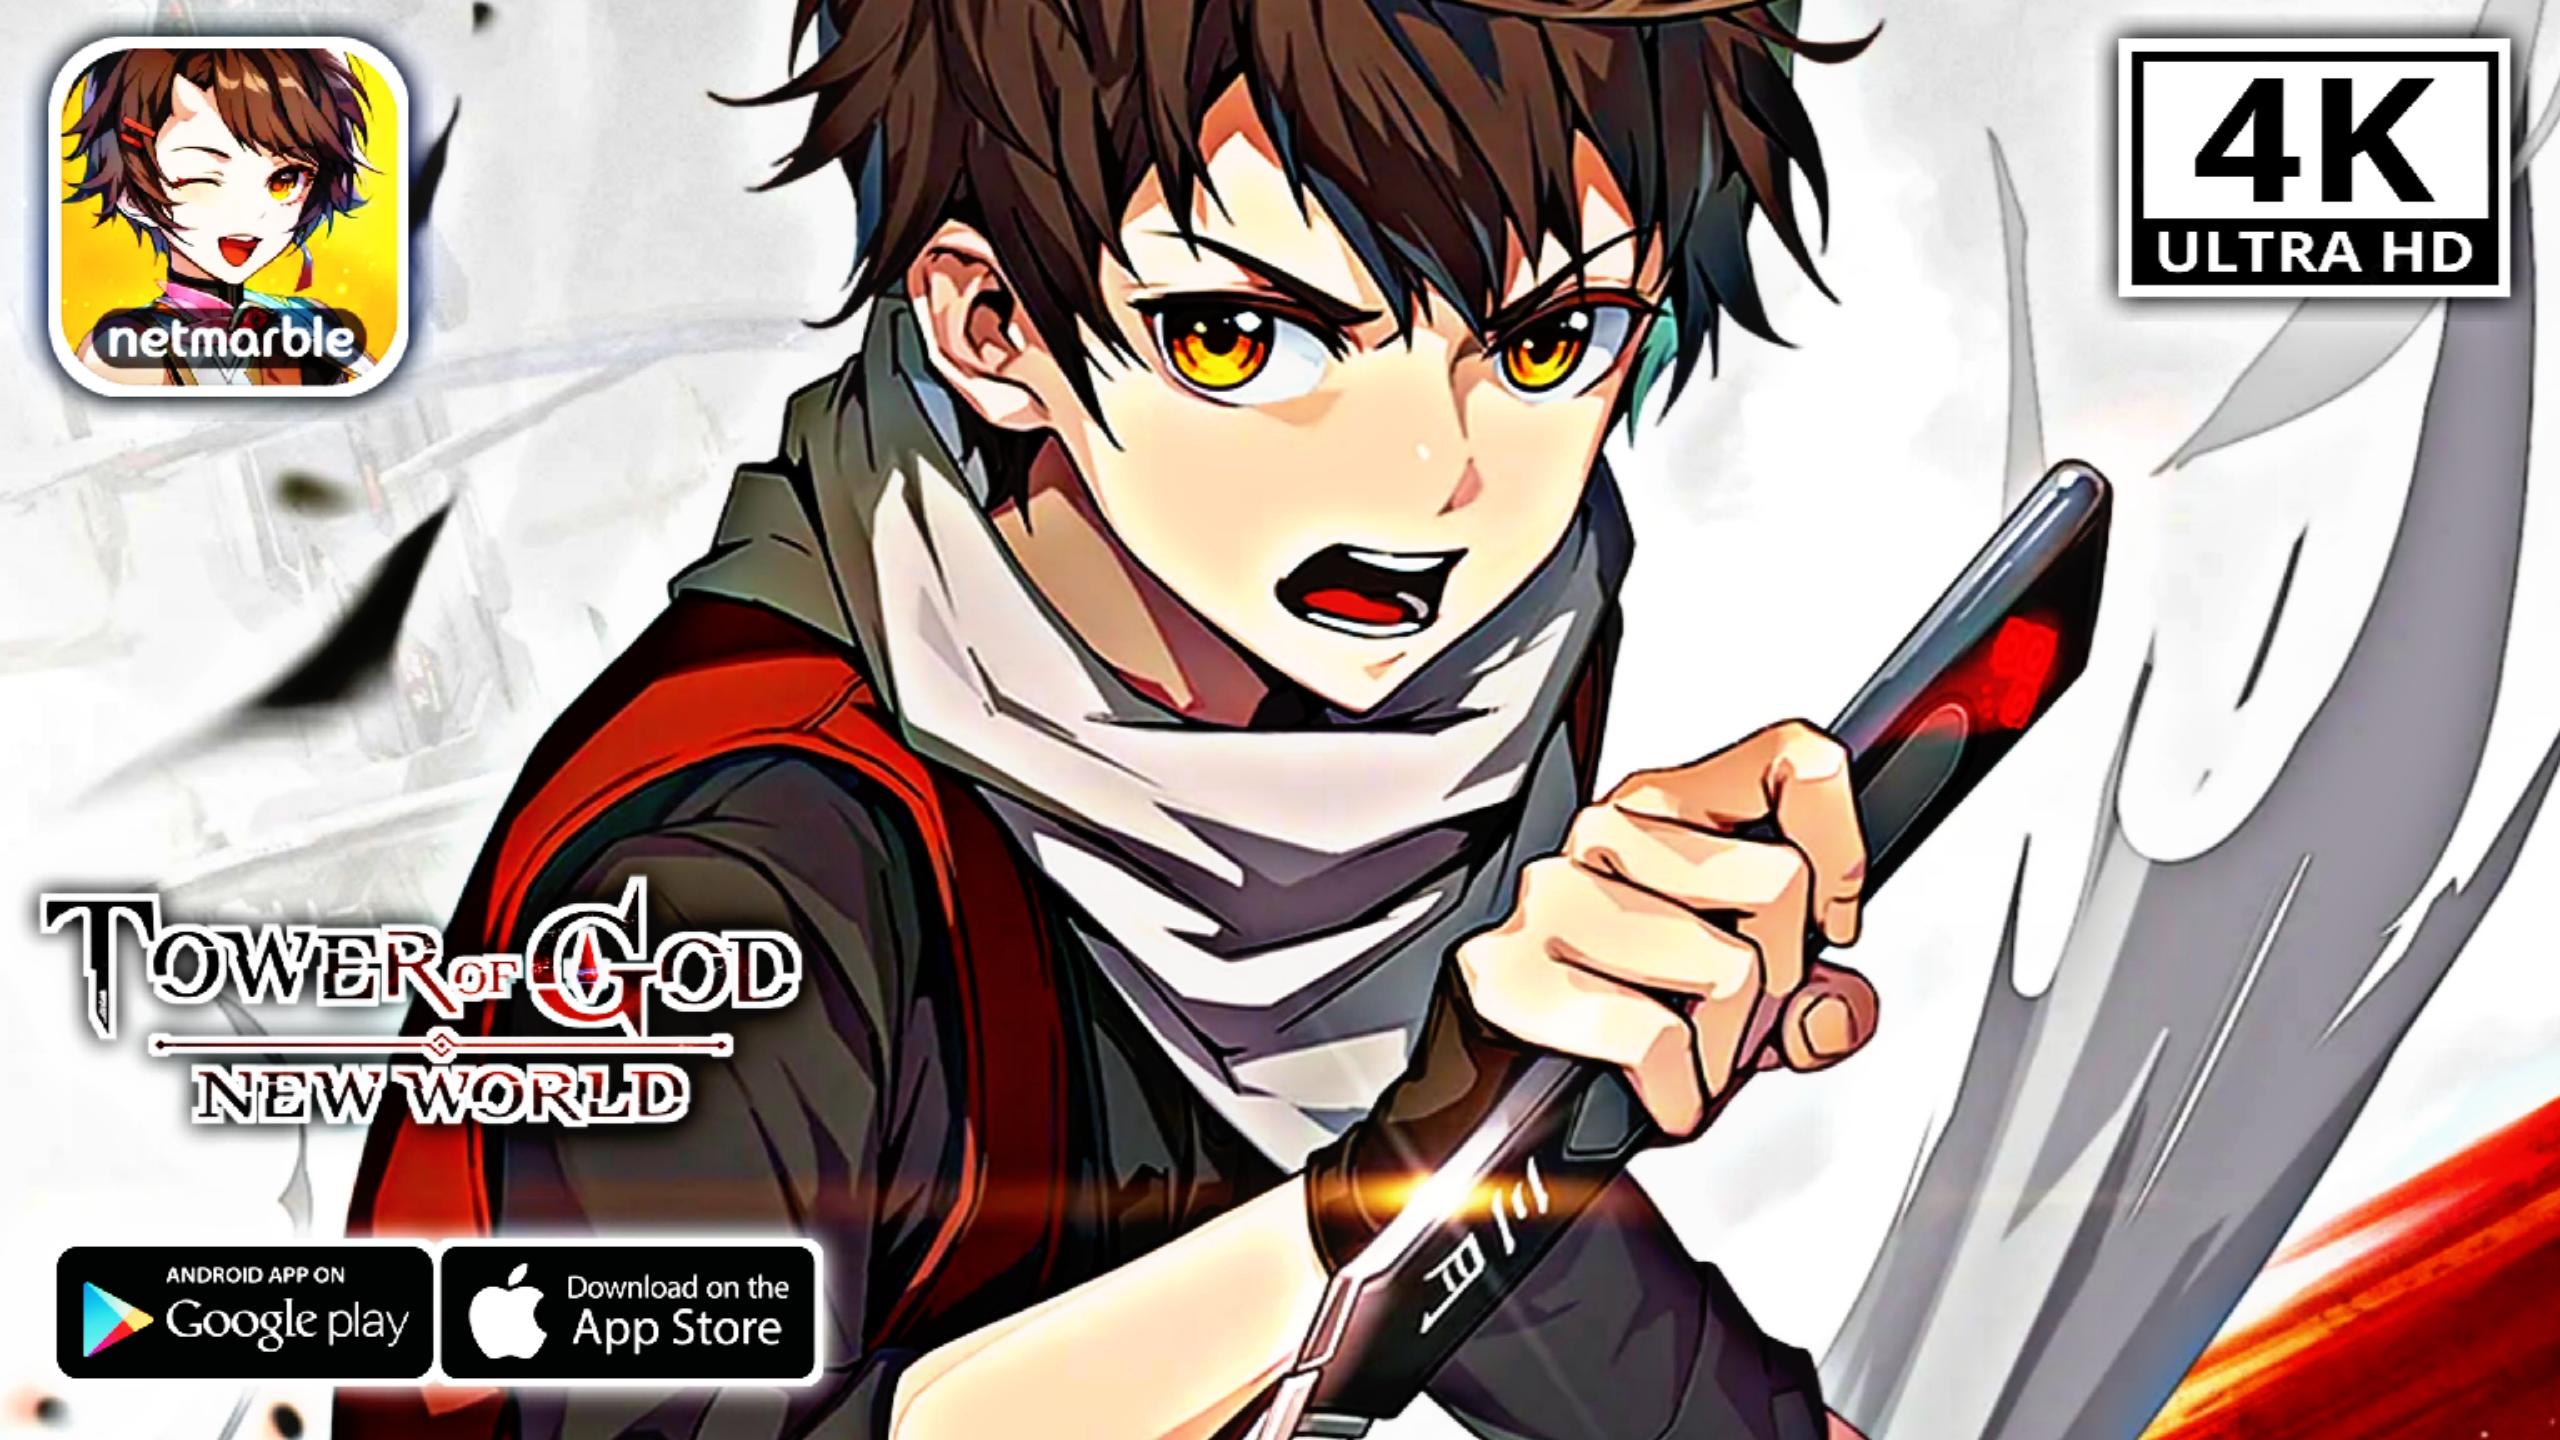 Anime World APK for Android Download